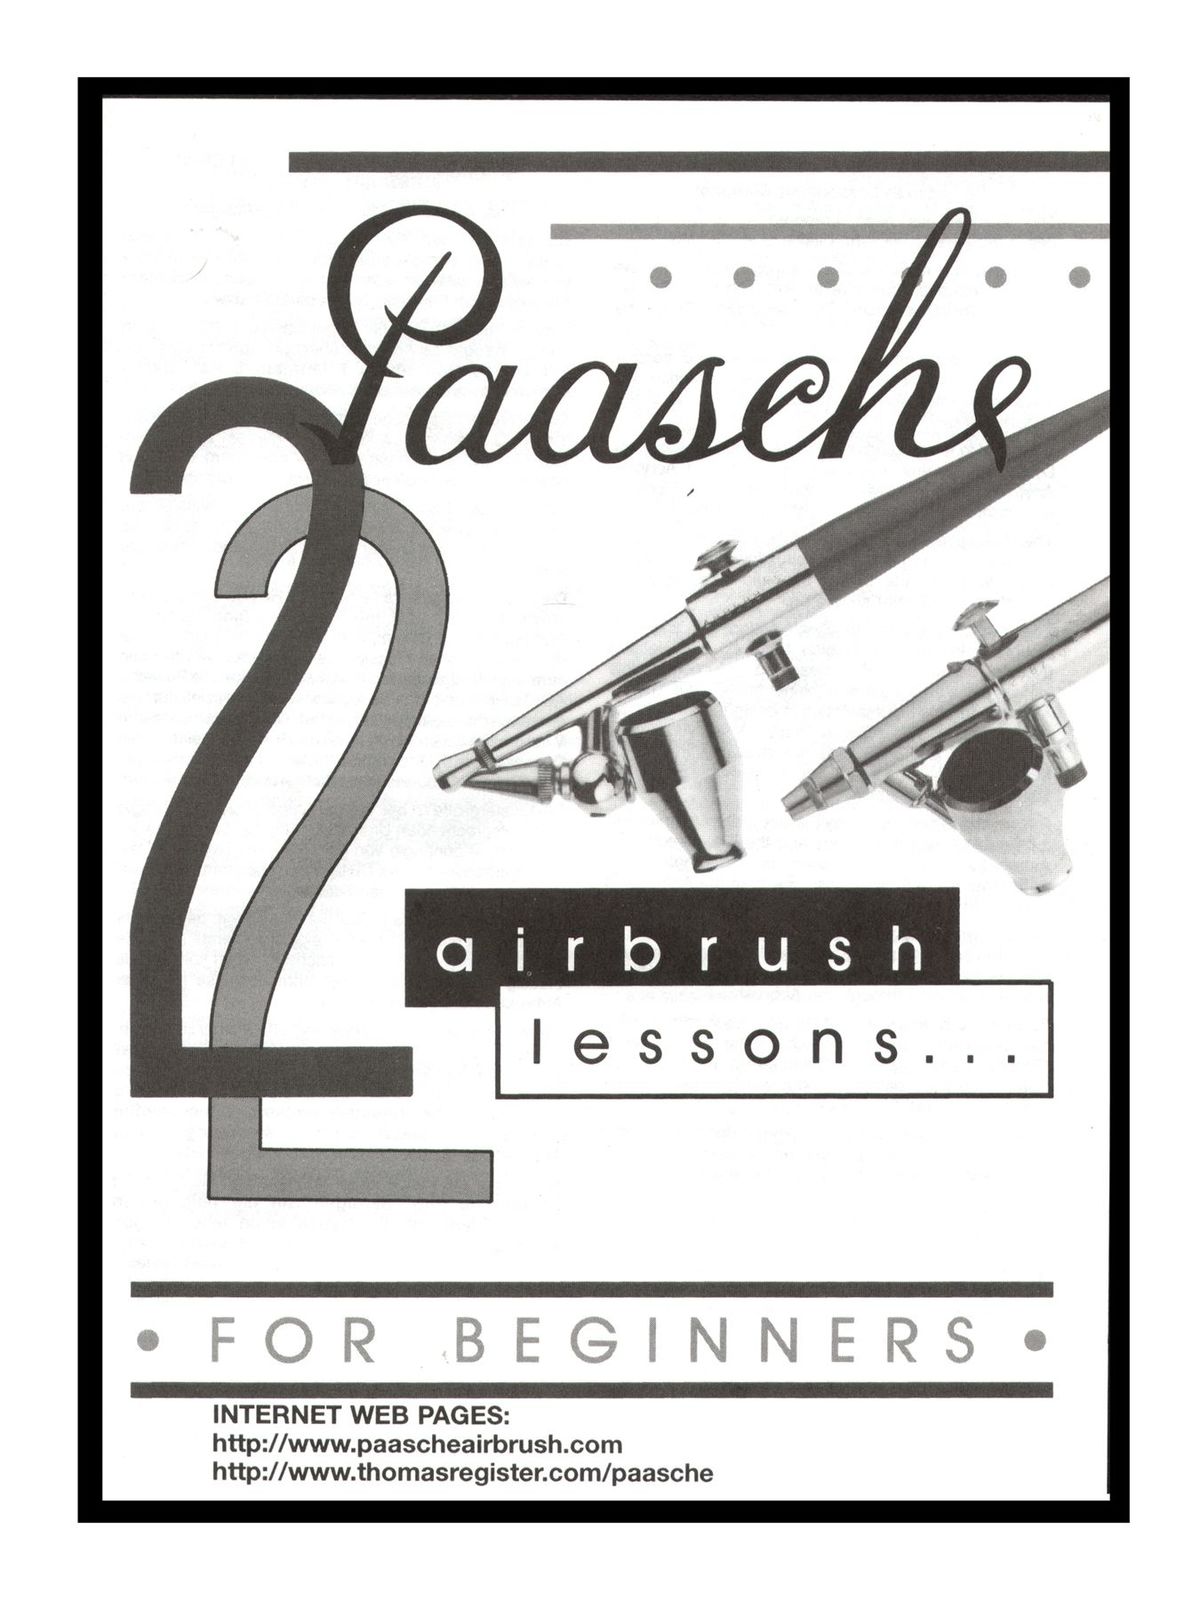 Paasche - 22 Airbrush Lessons For Beginners